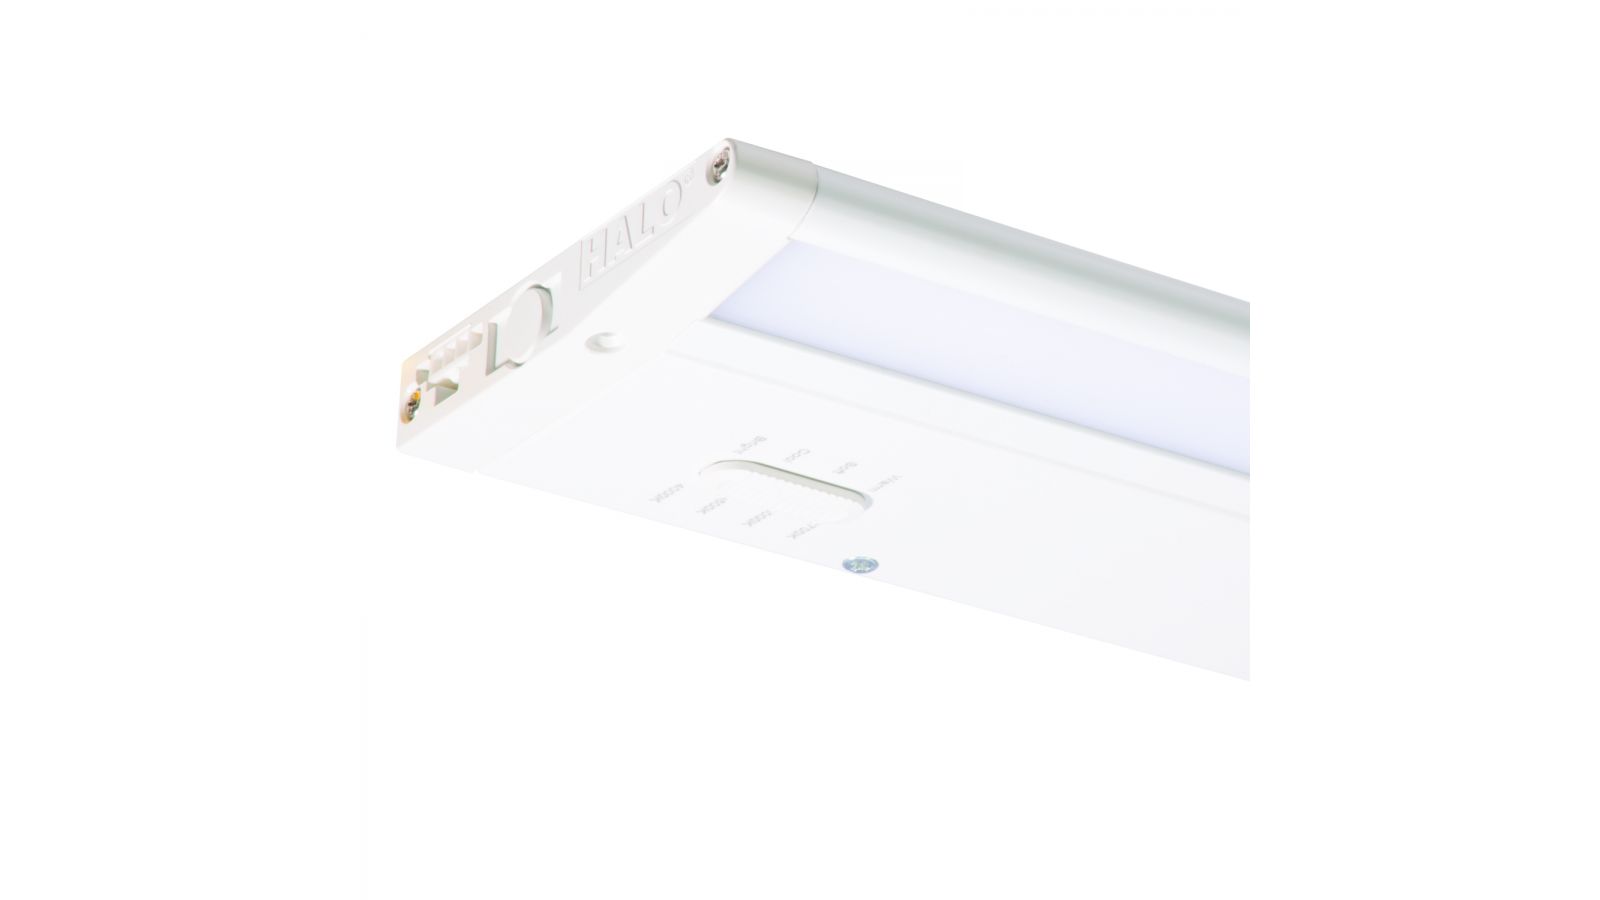 Halo HU30 LED Undercabinet with SeleCCTable Color Temperatures